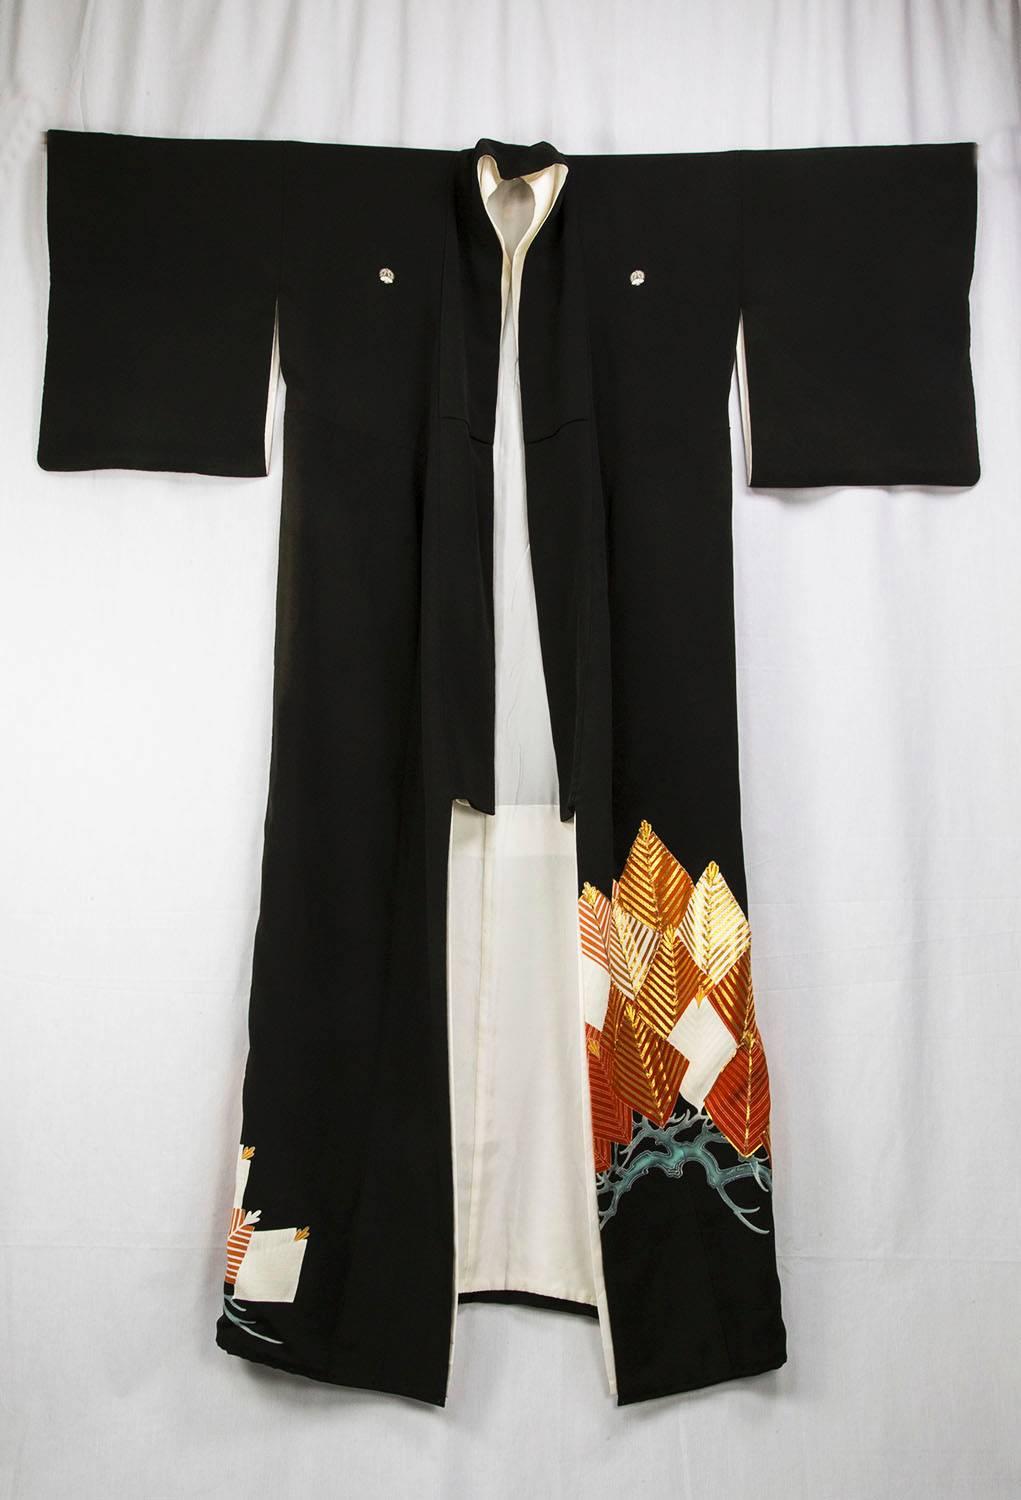 A Striking Japanese formal Black Silk Woman's Kimono (or Tomesode) , of the late Showa period, dyed with five Mon or family seals on the center back, front shoulders, and back sleeves. The Kimono is elegantly resist-dyed along the lower body with